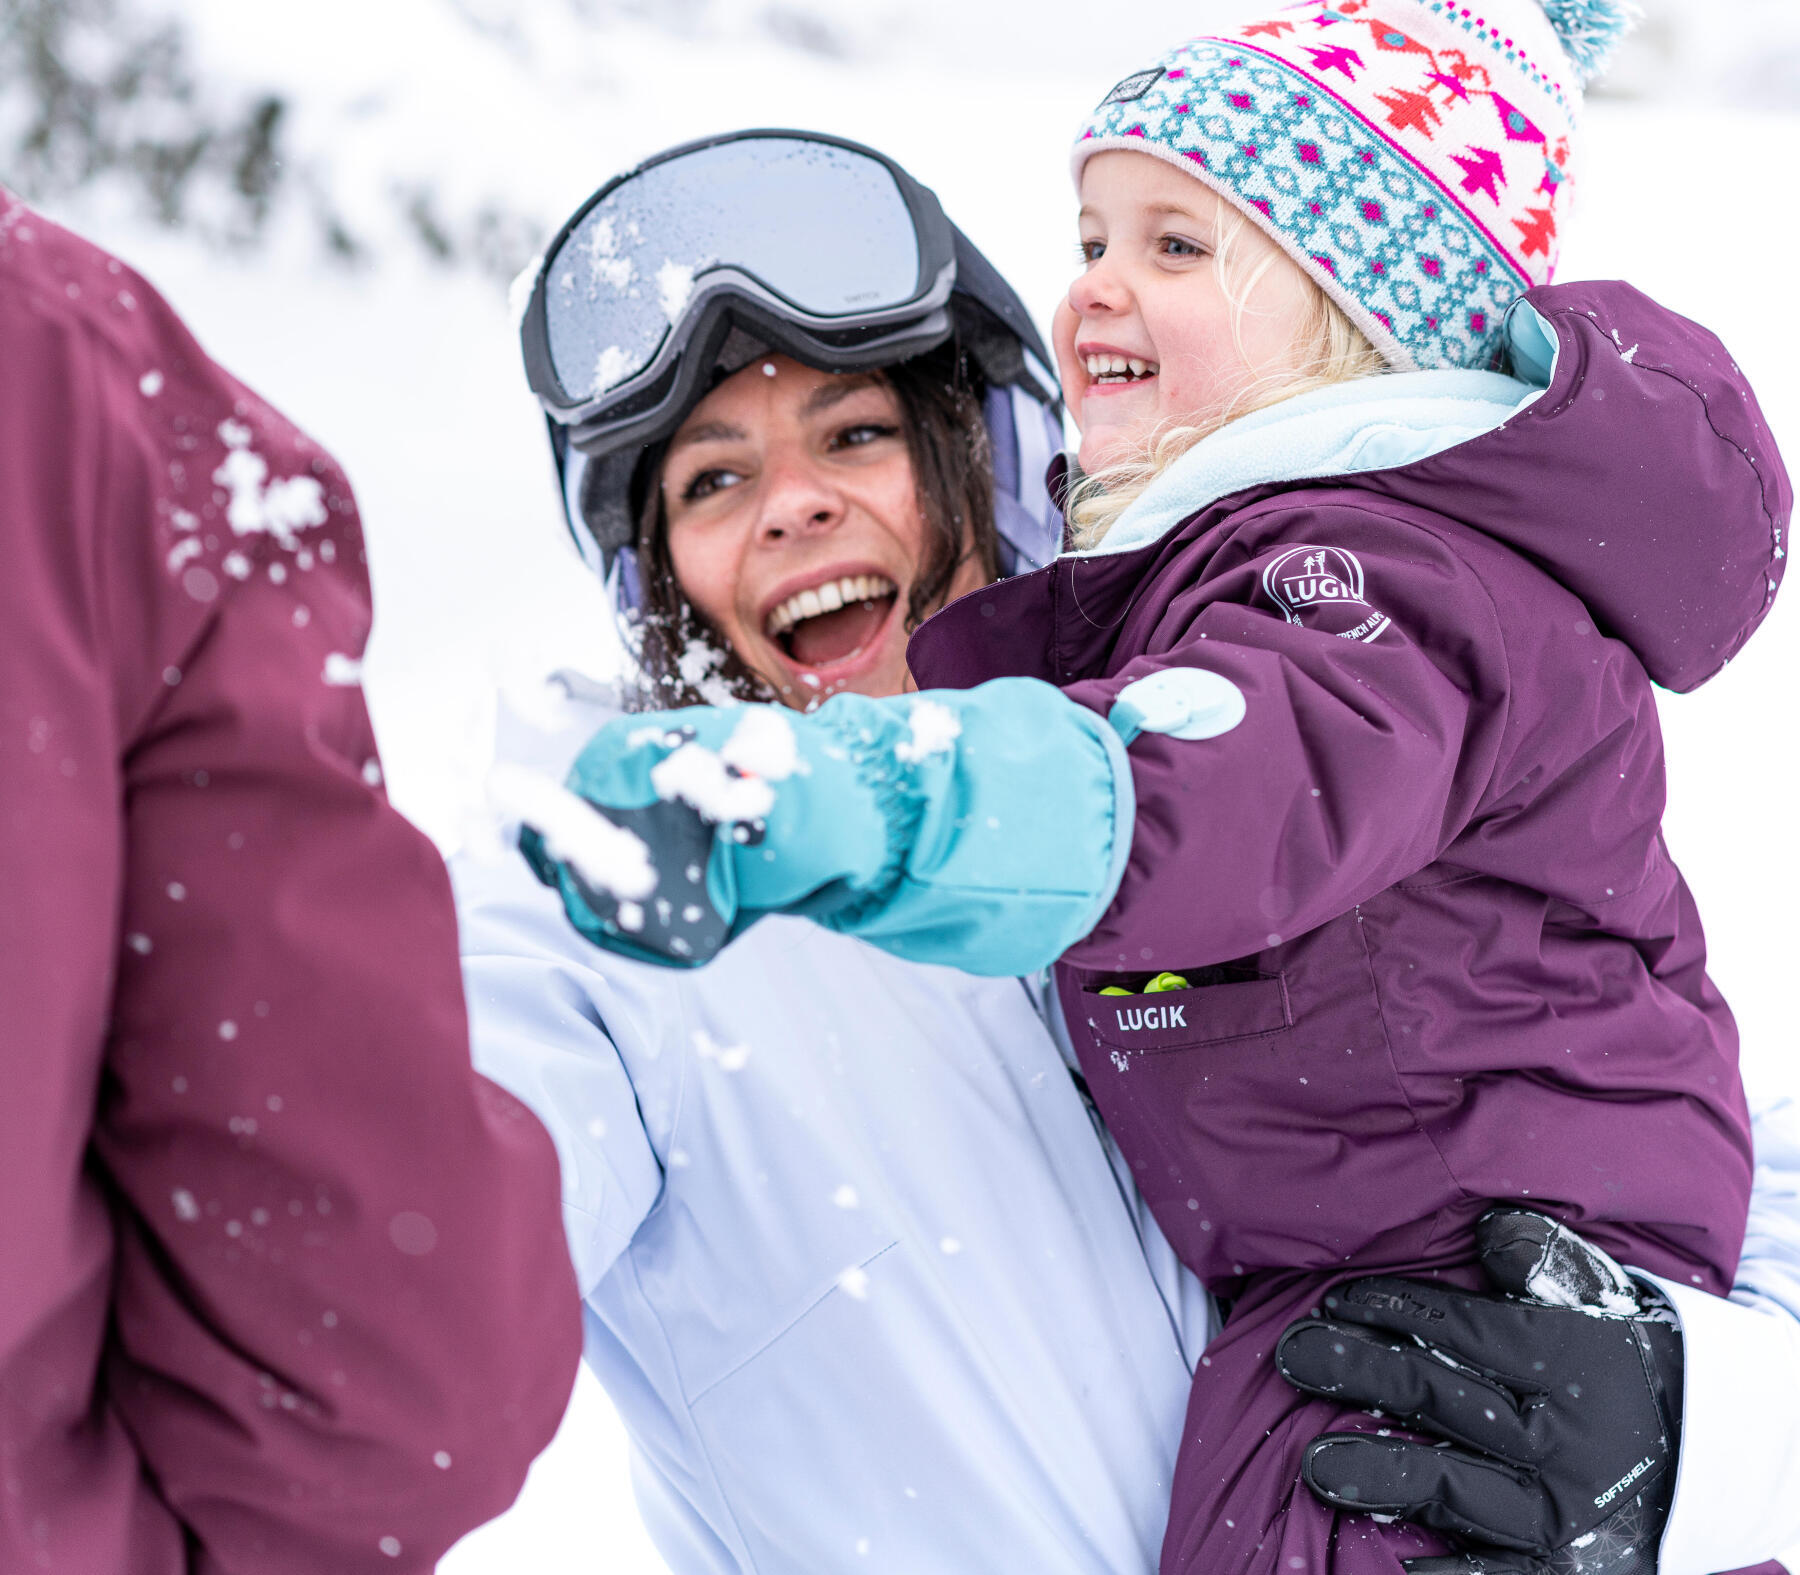 Looking after and repairing your child's ski suit properly